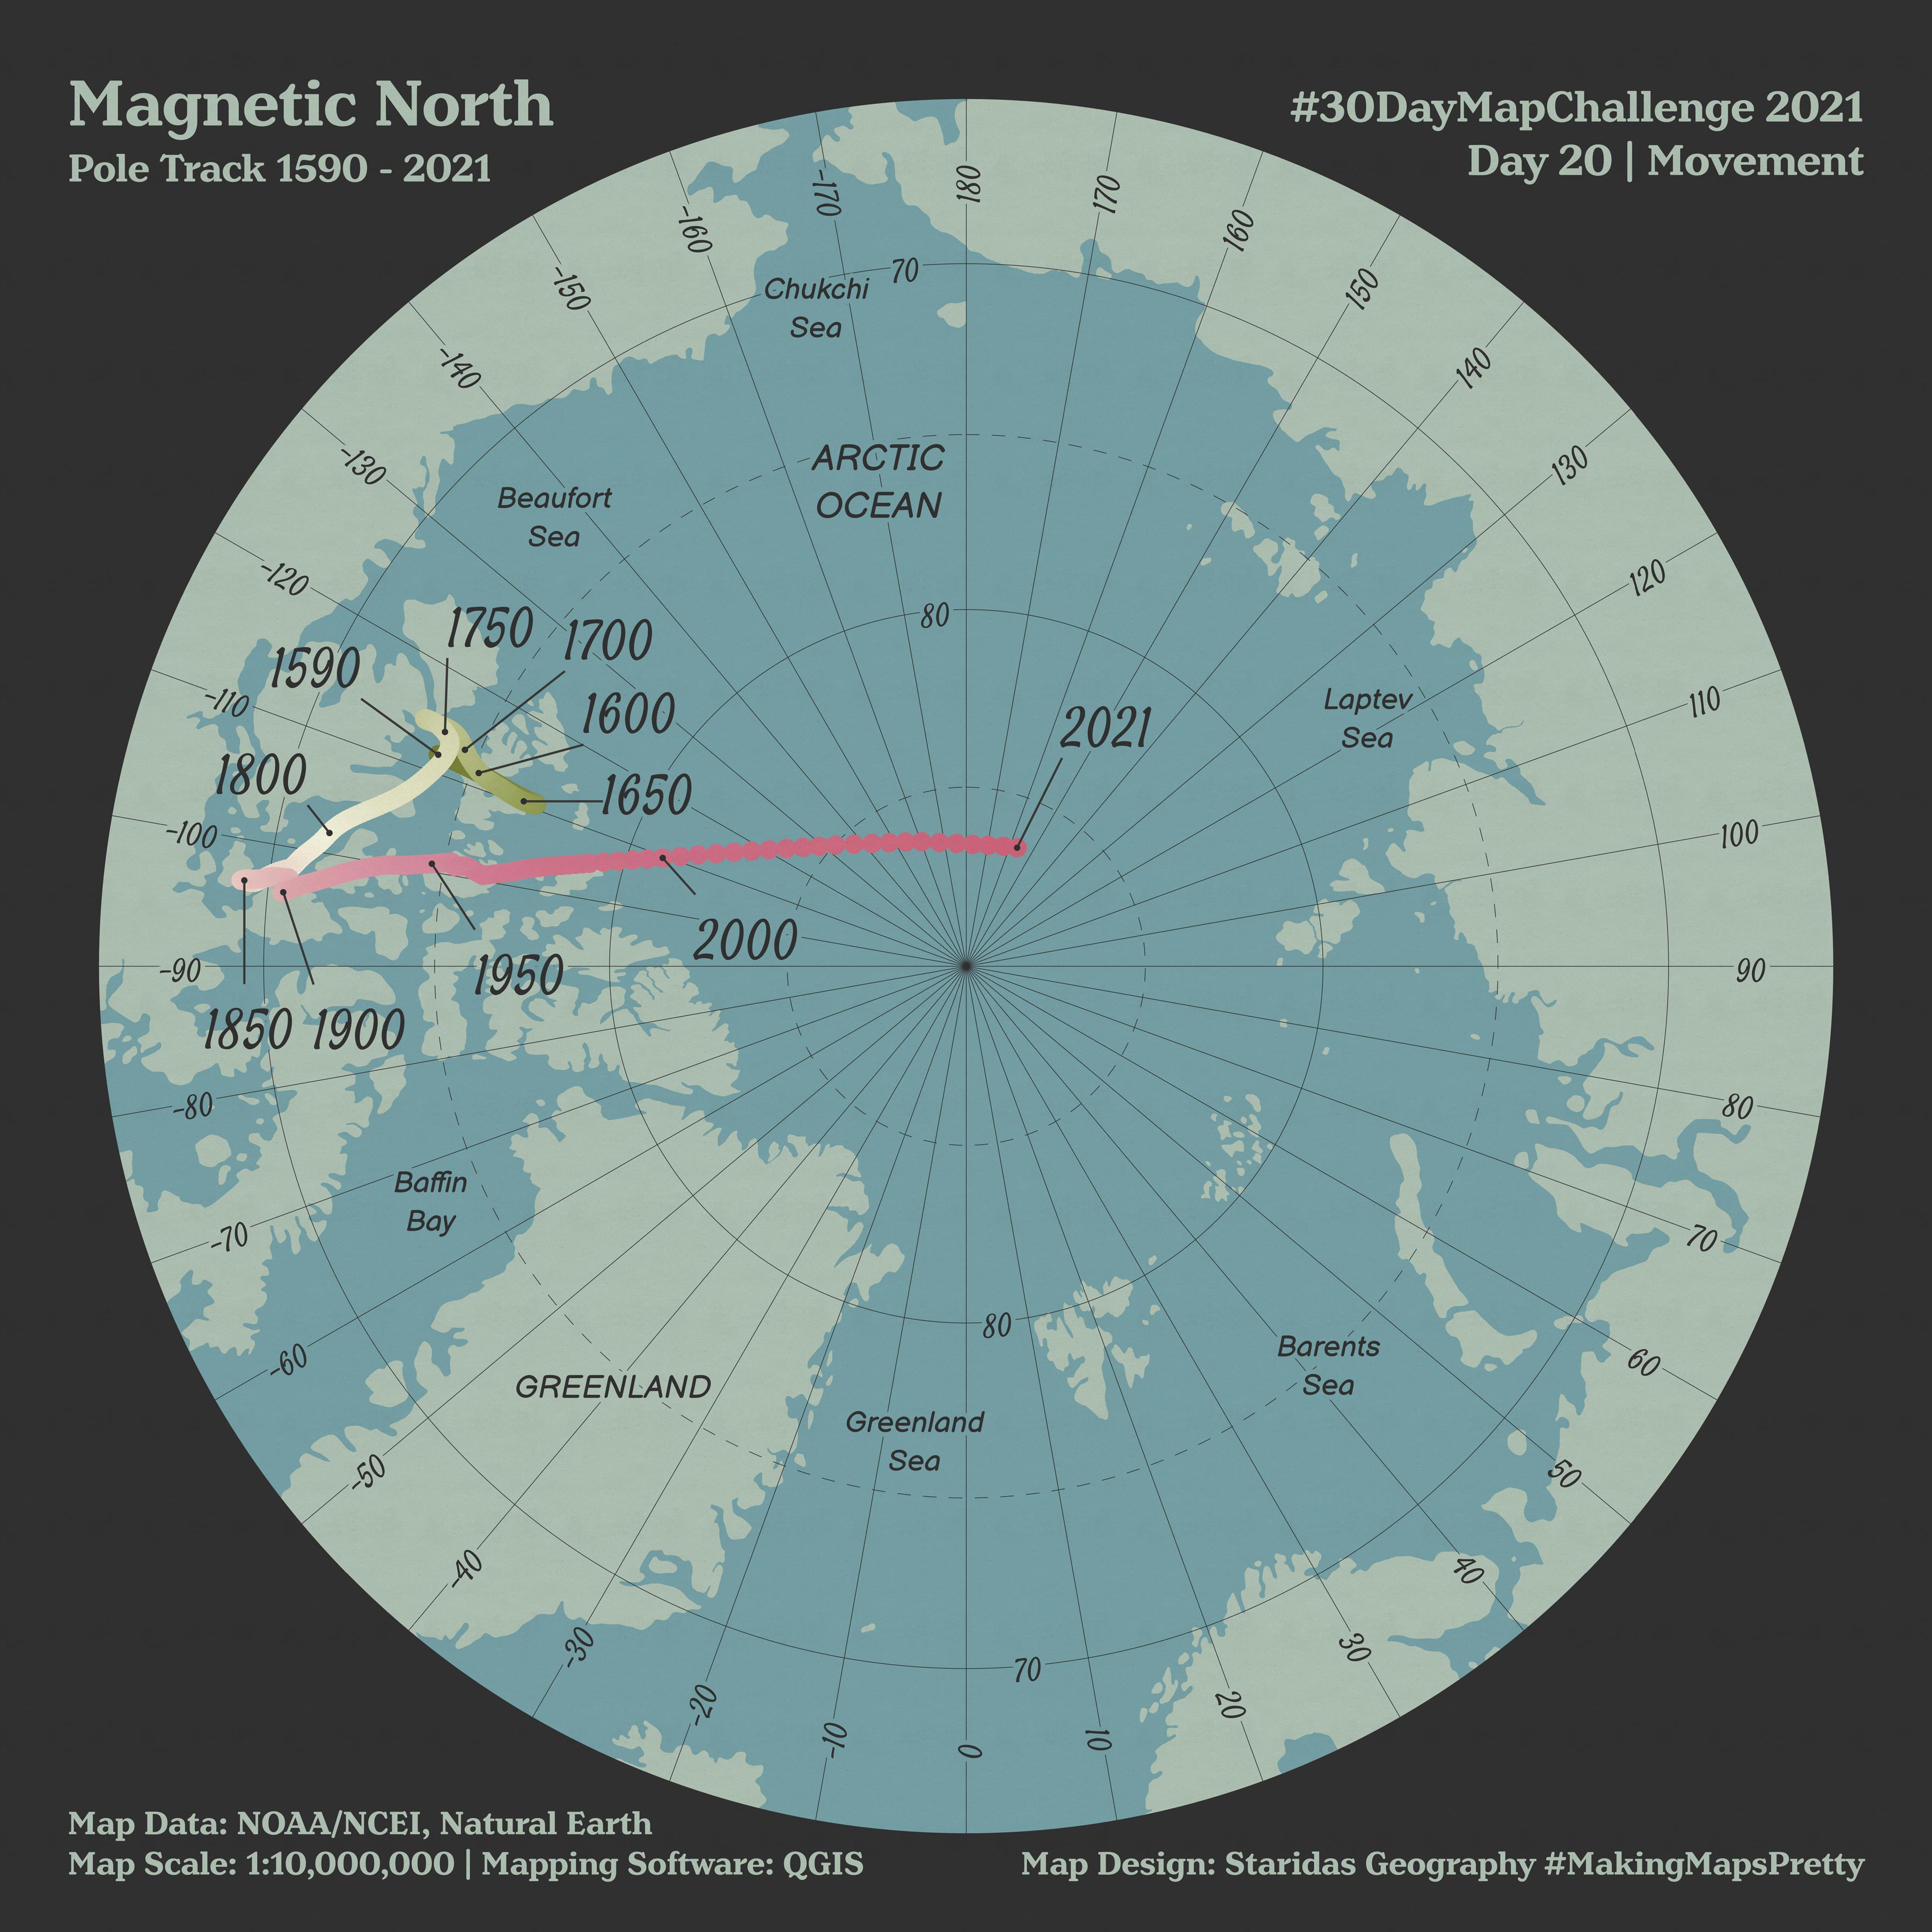 Magnetic North, Pole Track 1590 - 2021